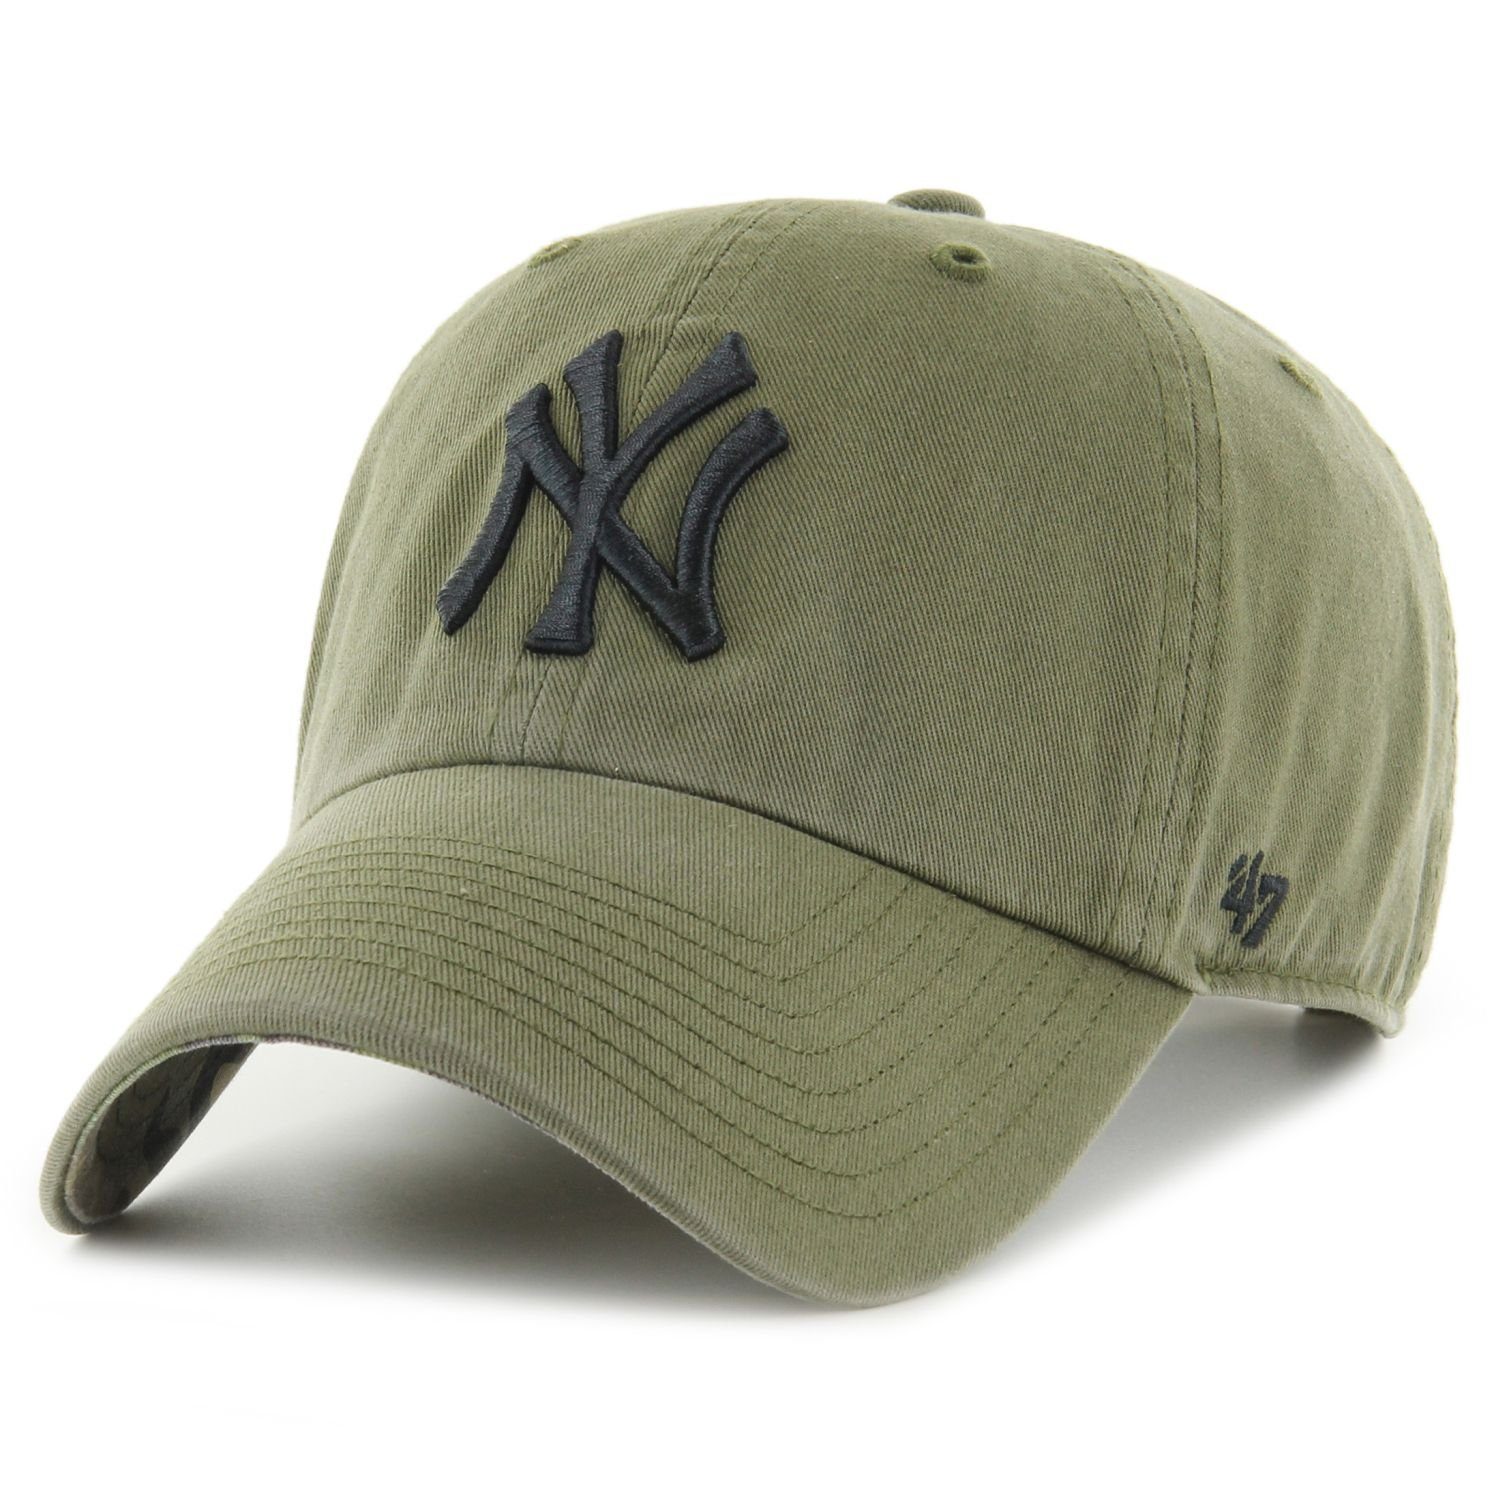 '47 Brand Trucker Cap Relaxed Fit CLEAN UP New York Yankees sandal